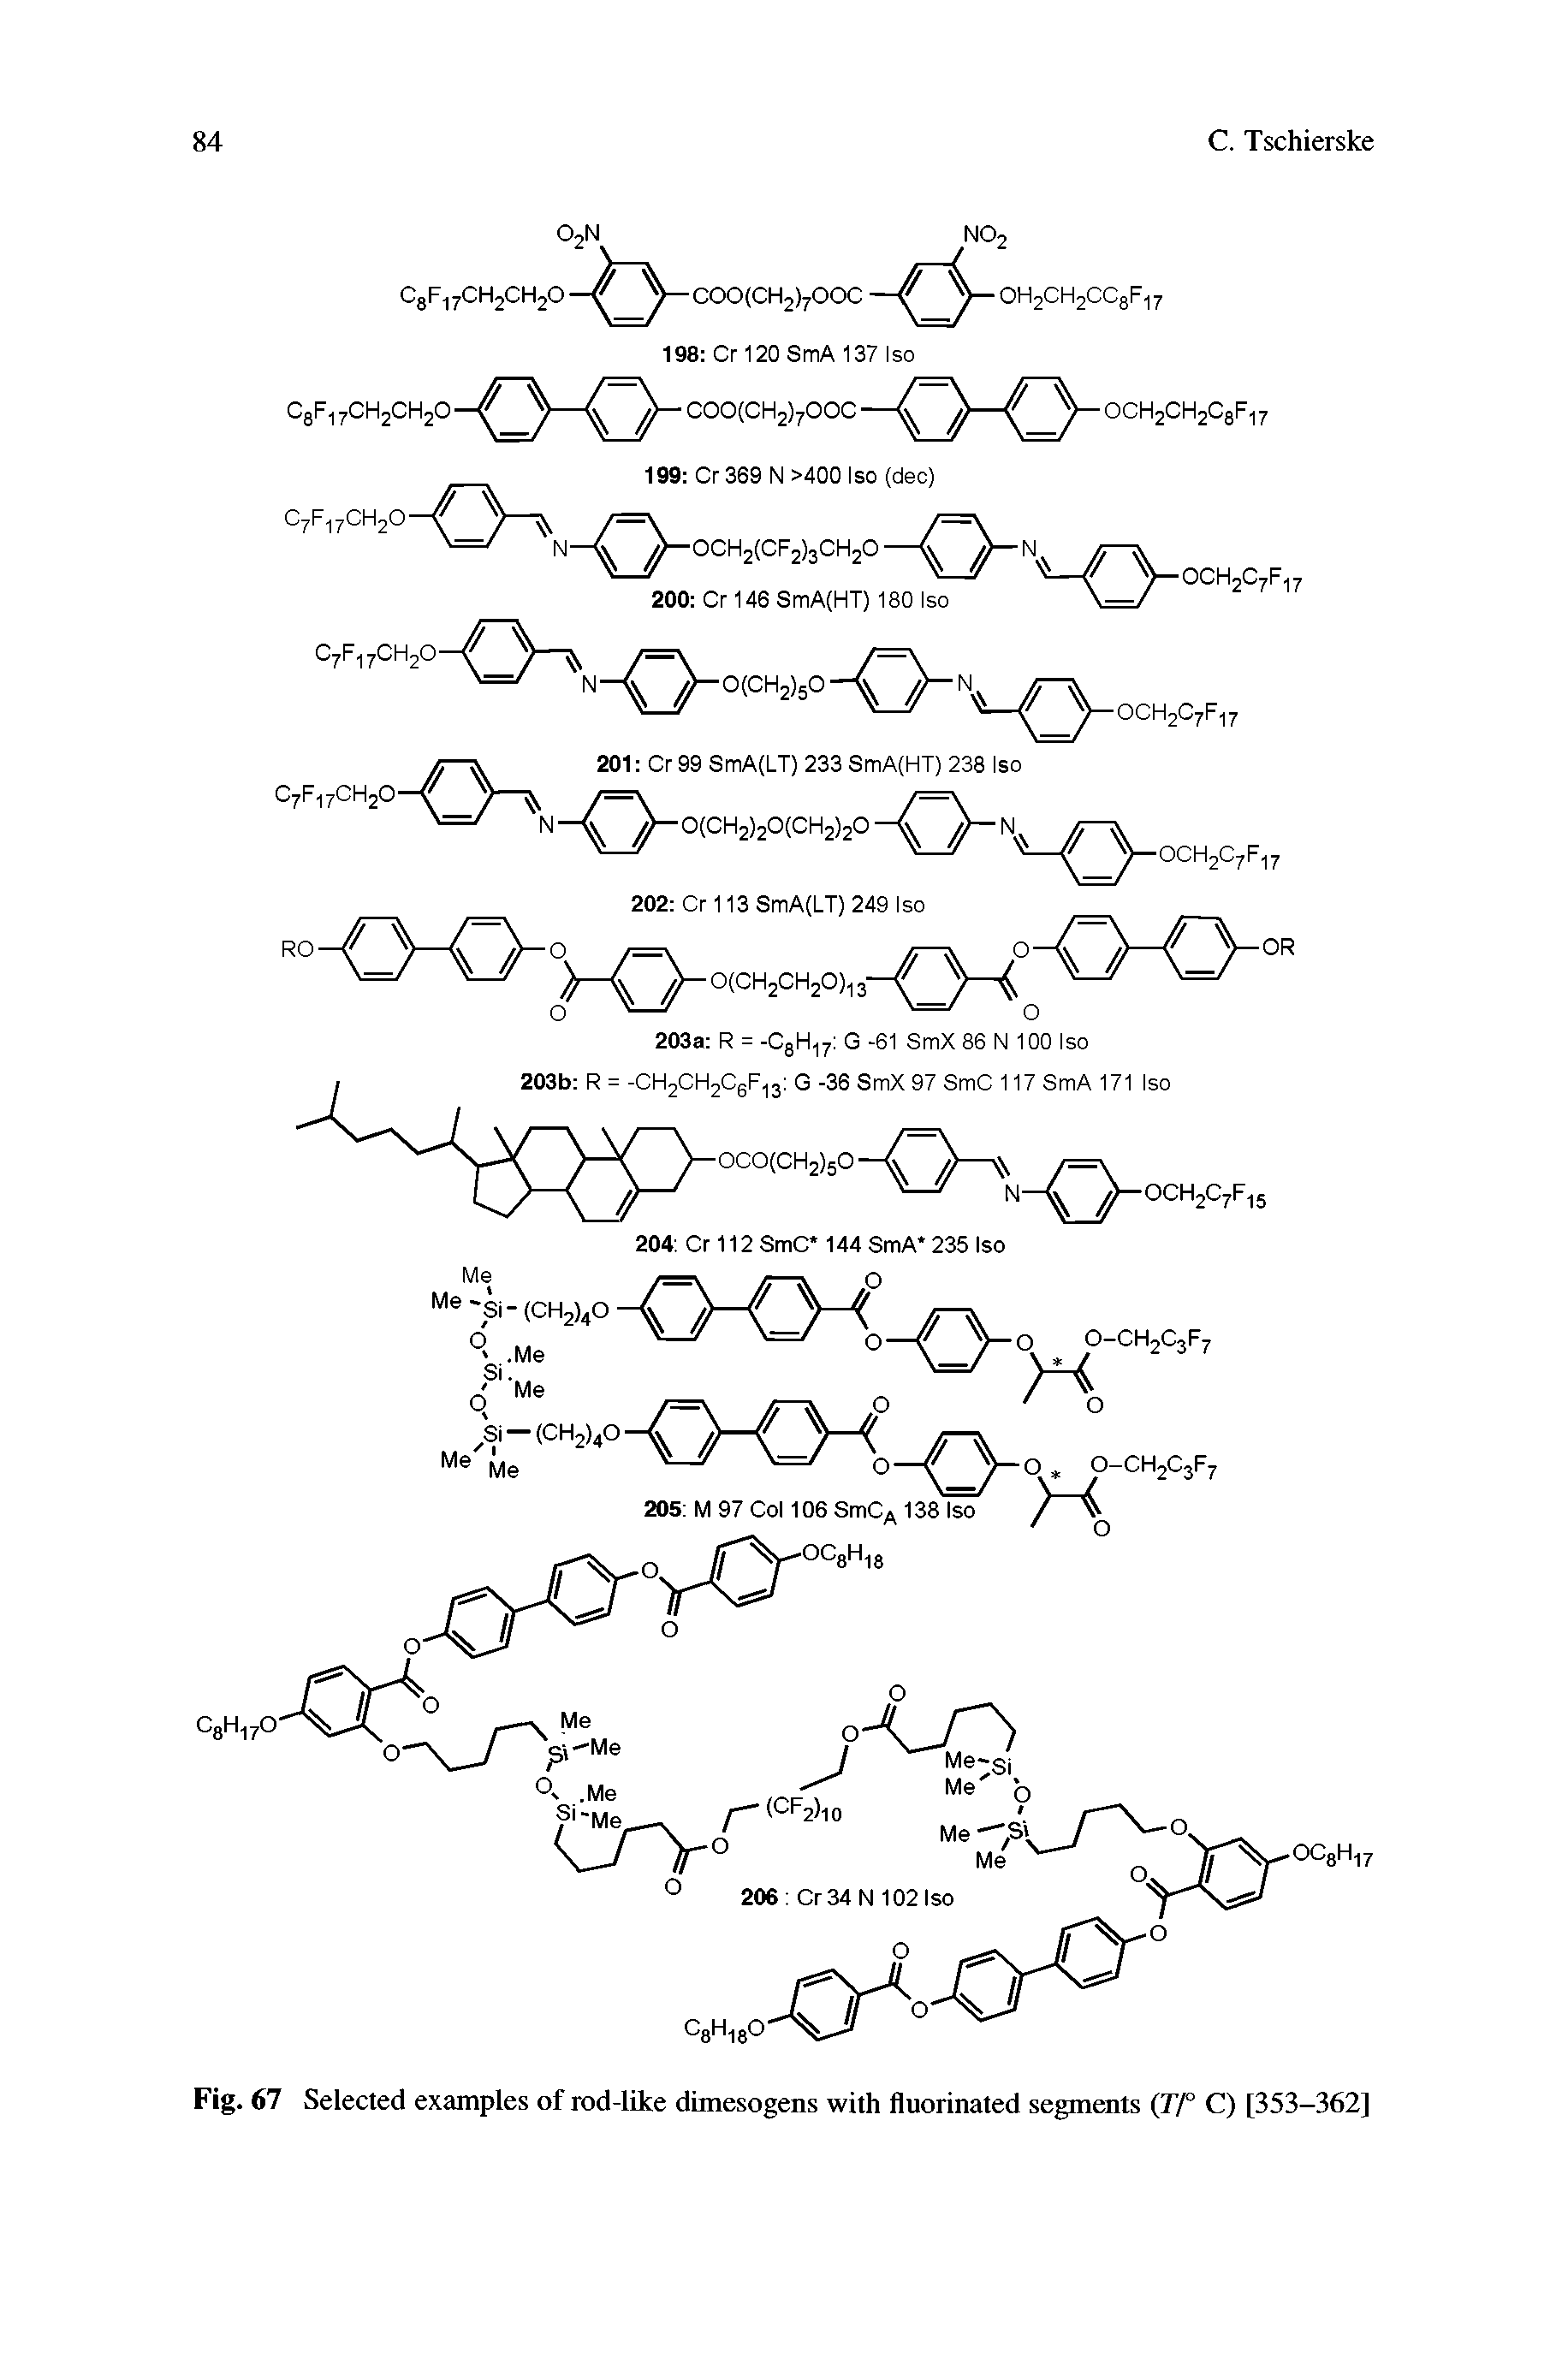 Fig. 67 Selected examples of rod-like dimesogens with fluorinated segments ( //" C) [353-362]...